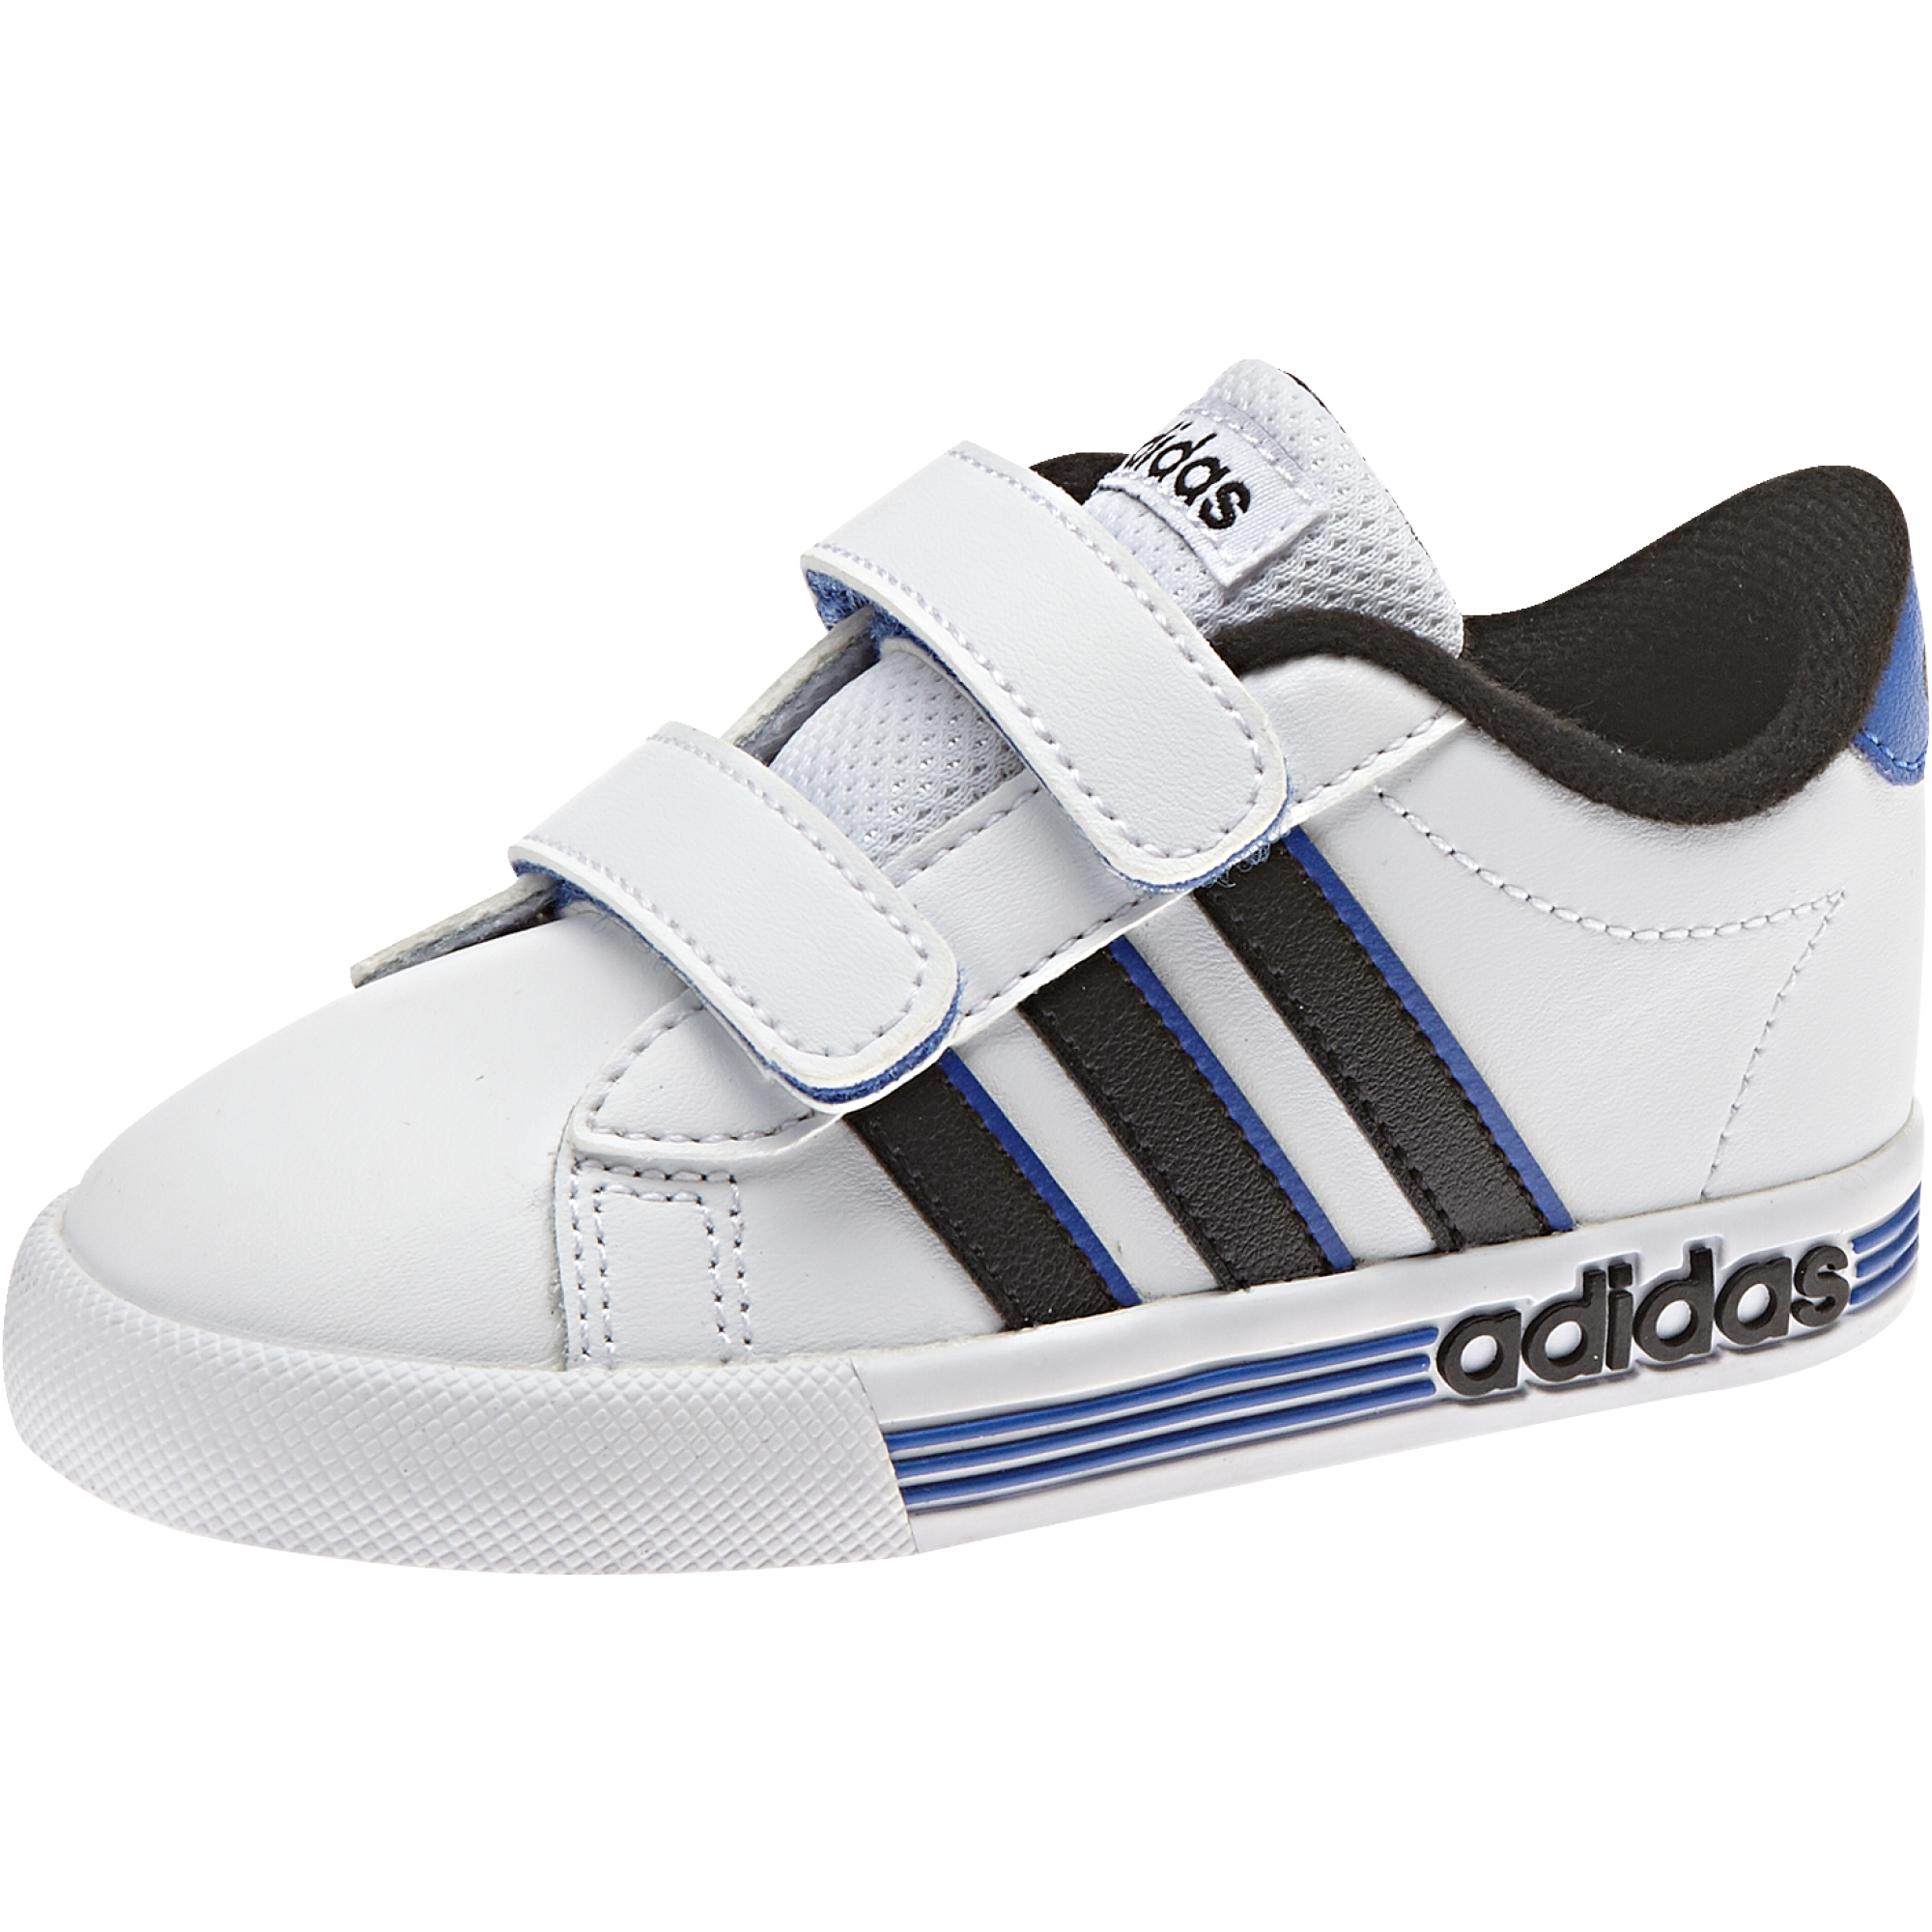 adidas toddler shoes nz